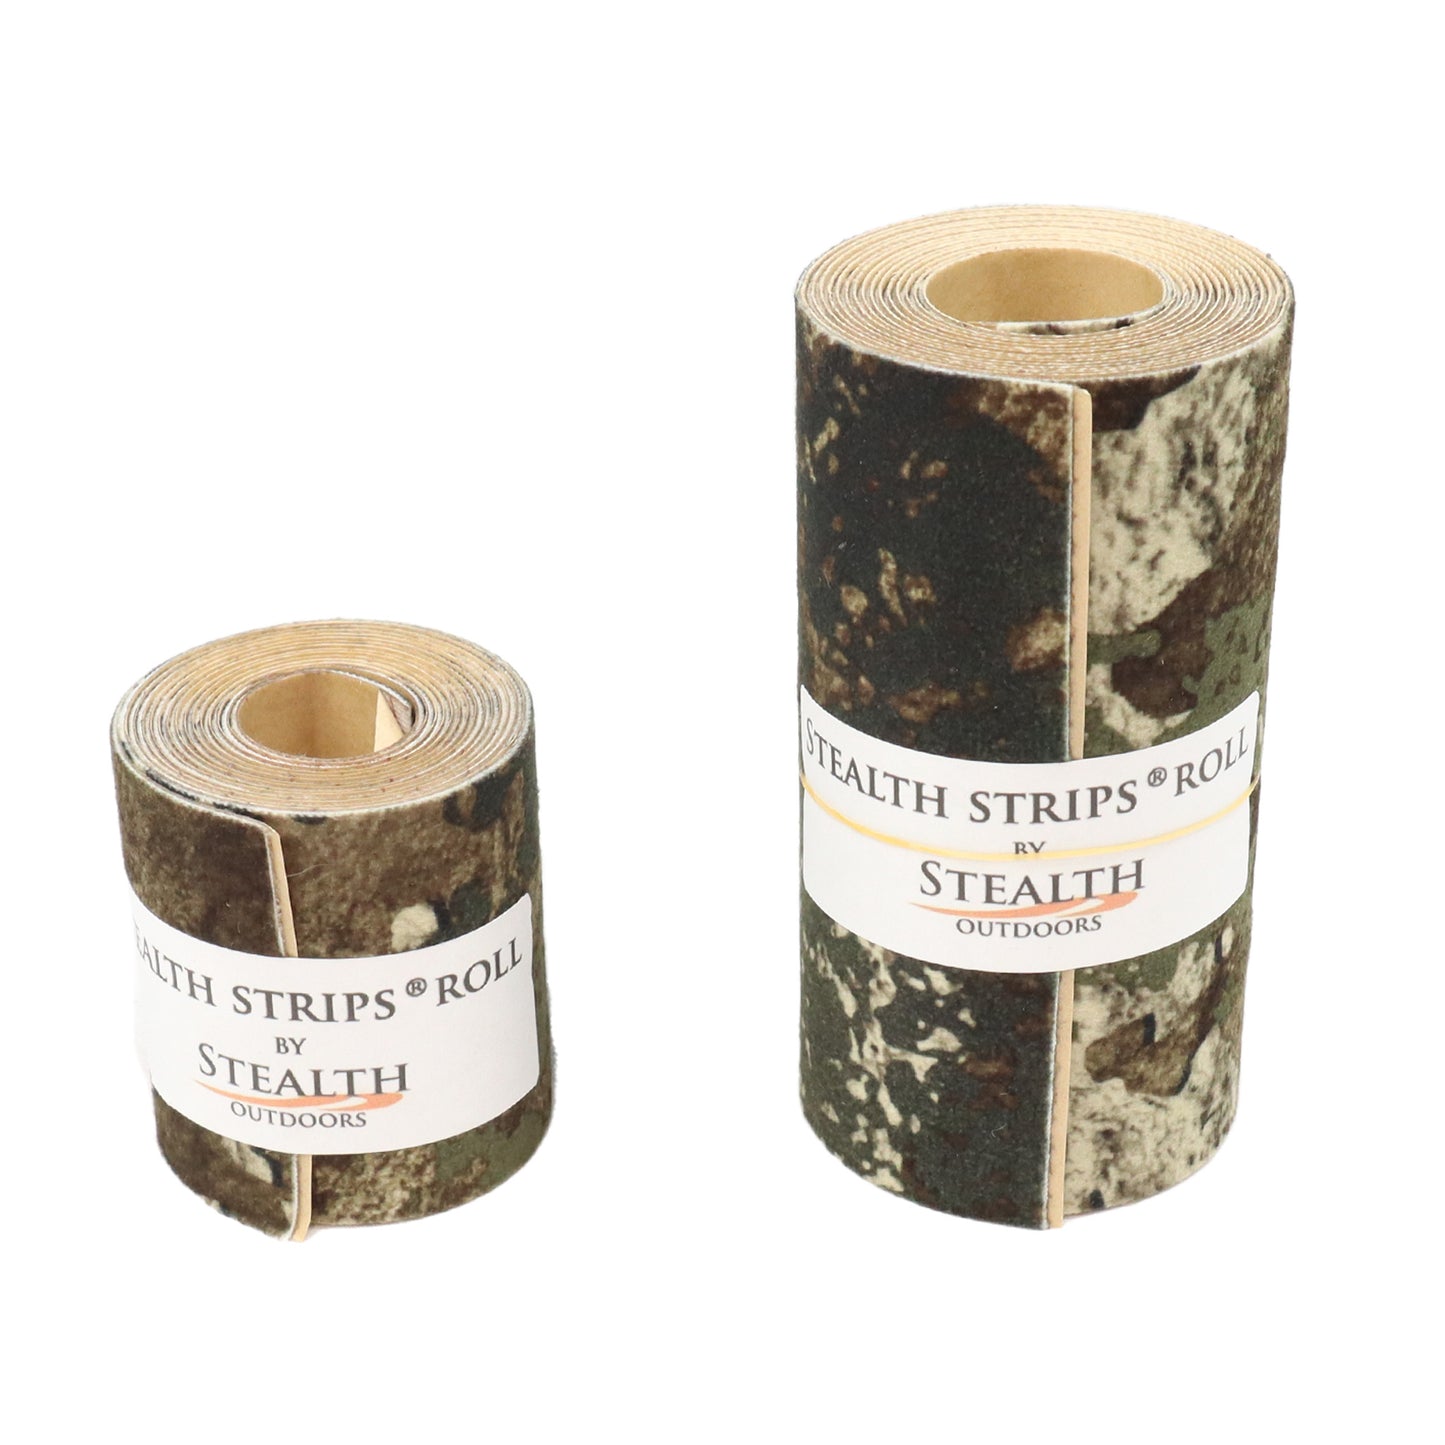 Stealth Strip Rolls in Original and Large Sizes